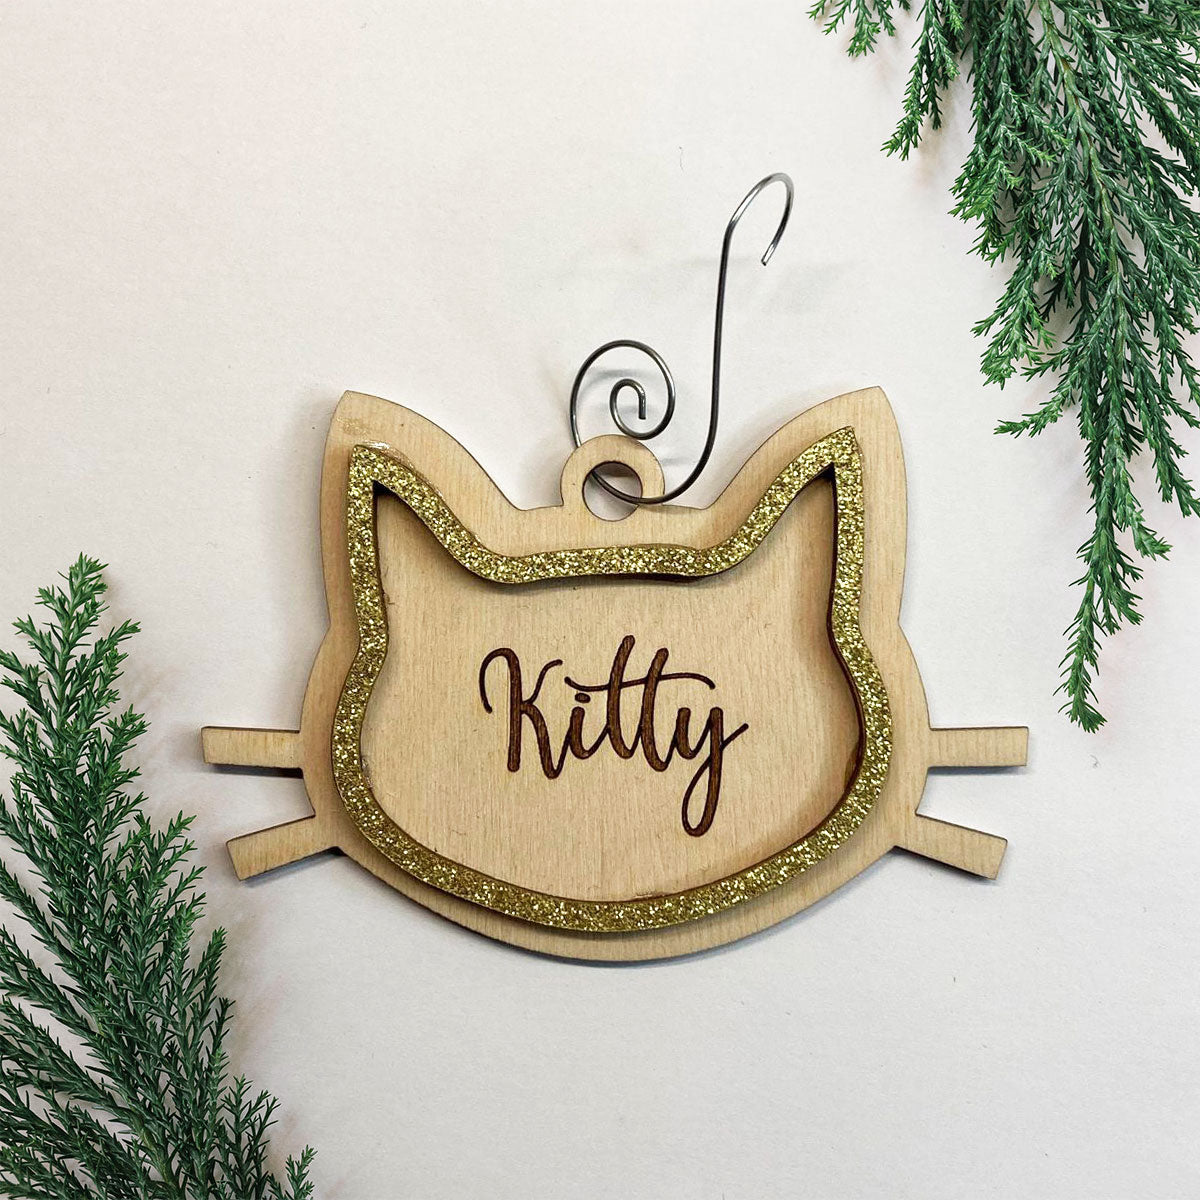 Personalized Pet Christmas Ornament